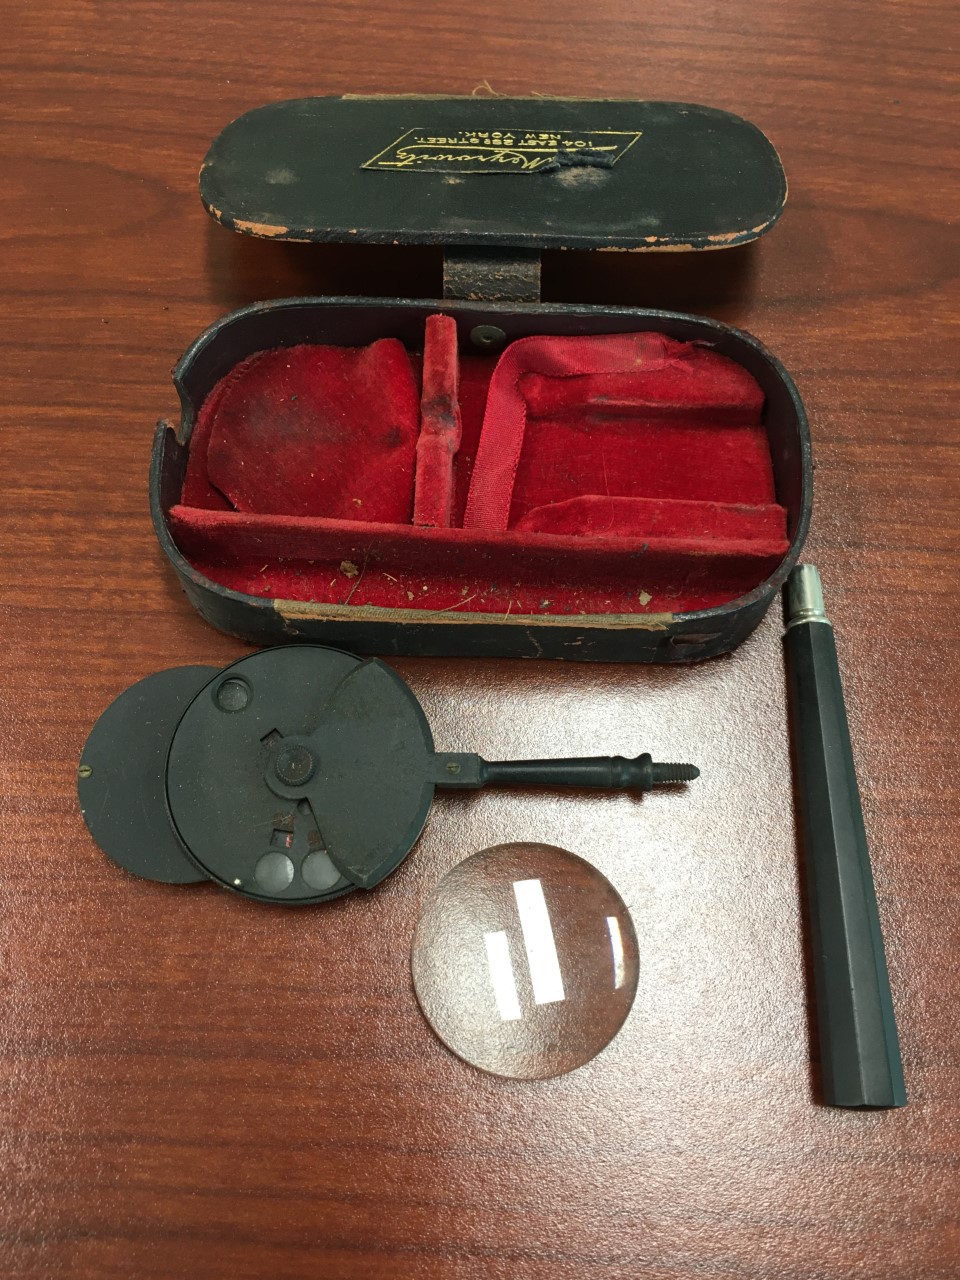 An ophthalmoscope